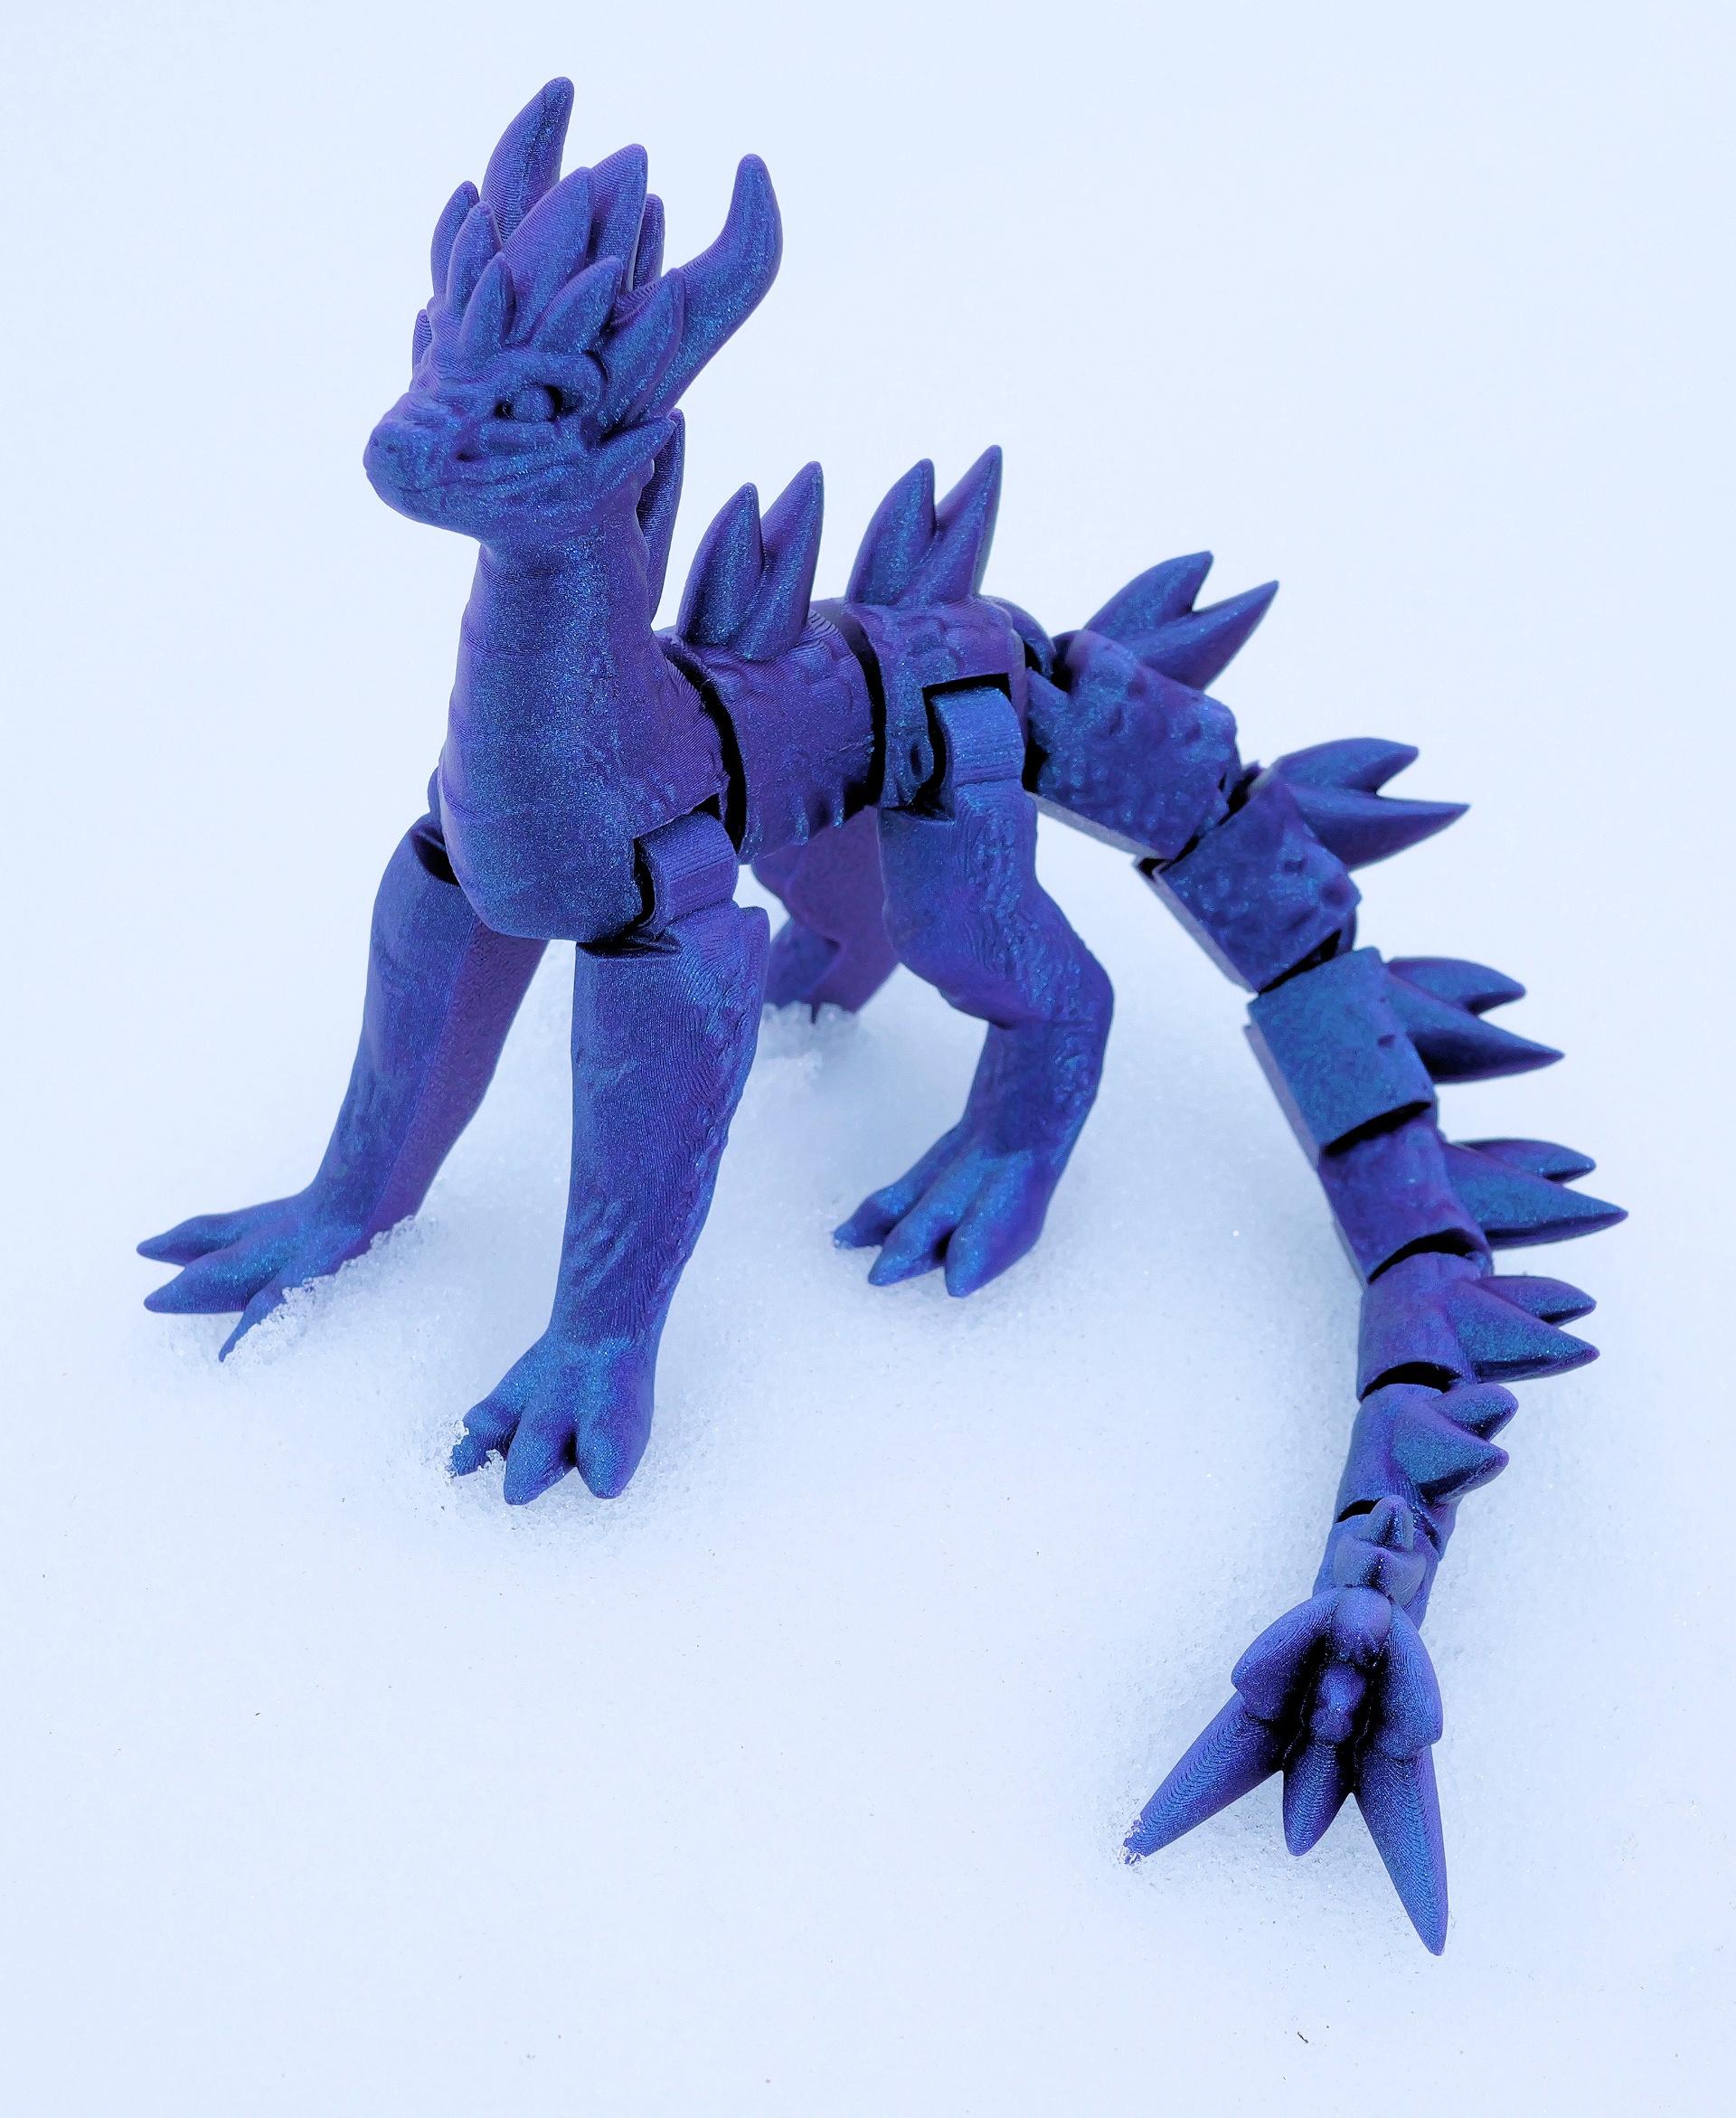 Spryo Youngling Dragon - Spryo out for an adventure in the snow. - 3d model